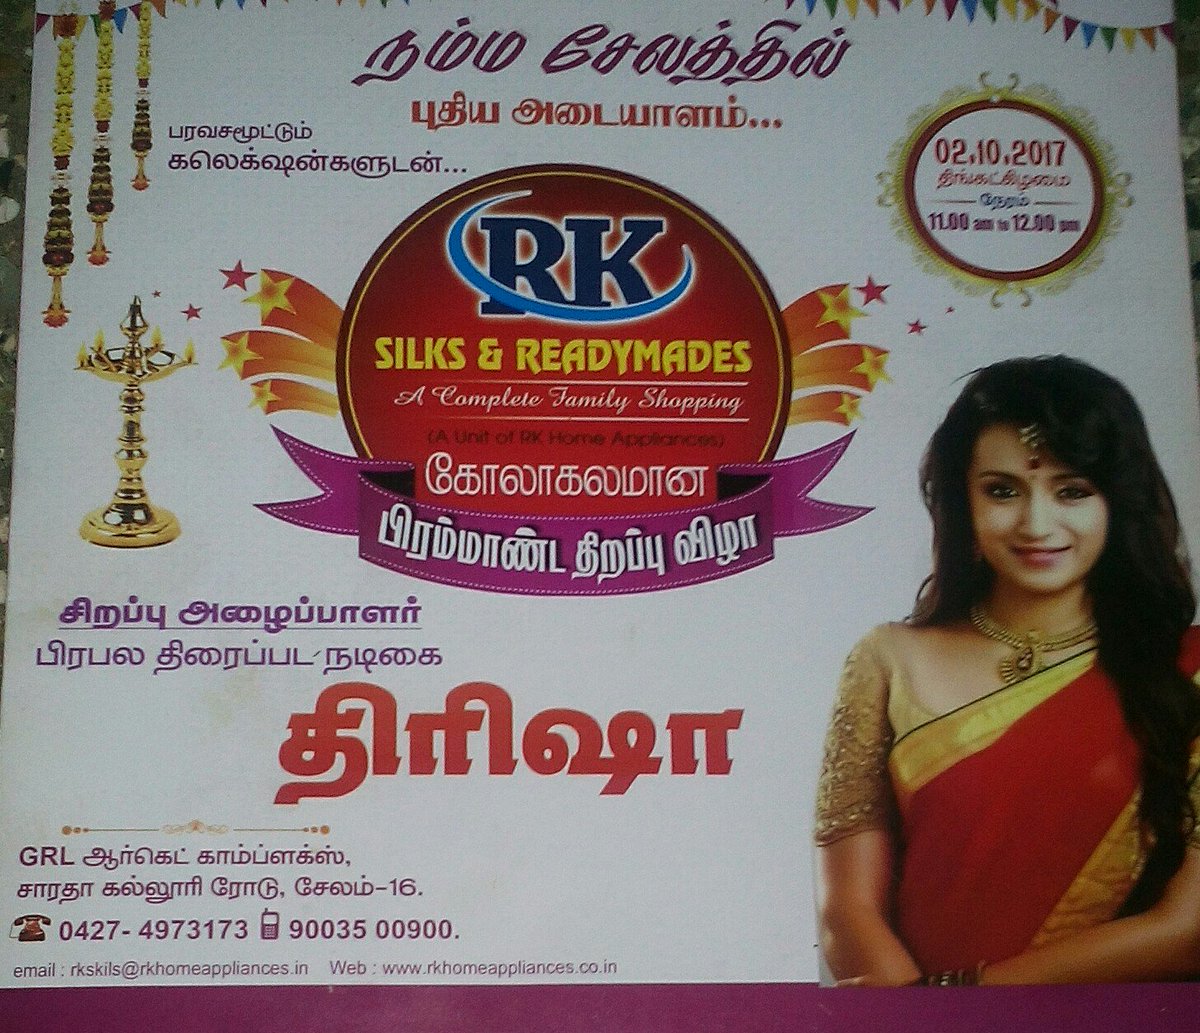 @trishtrashers is going to inaugurate RK Silks & Readymades Showroom today in Salem | Time : 11am - 12pm | Get ready Salem Fans